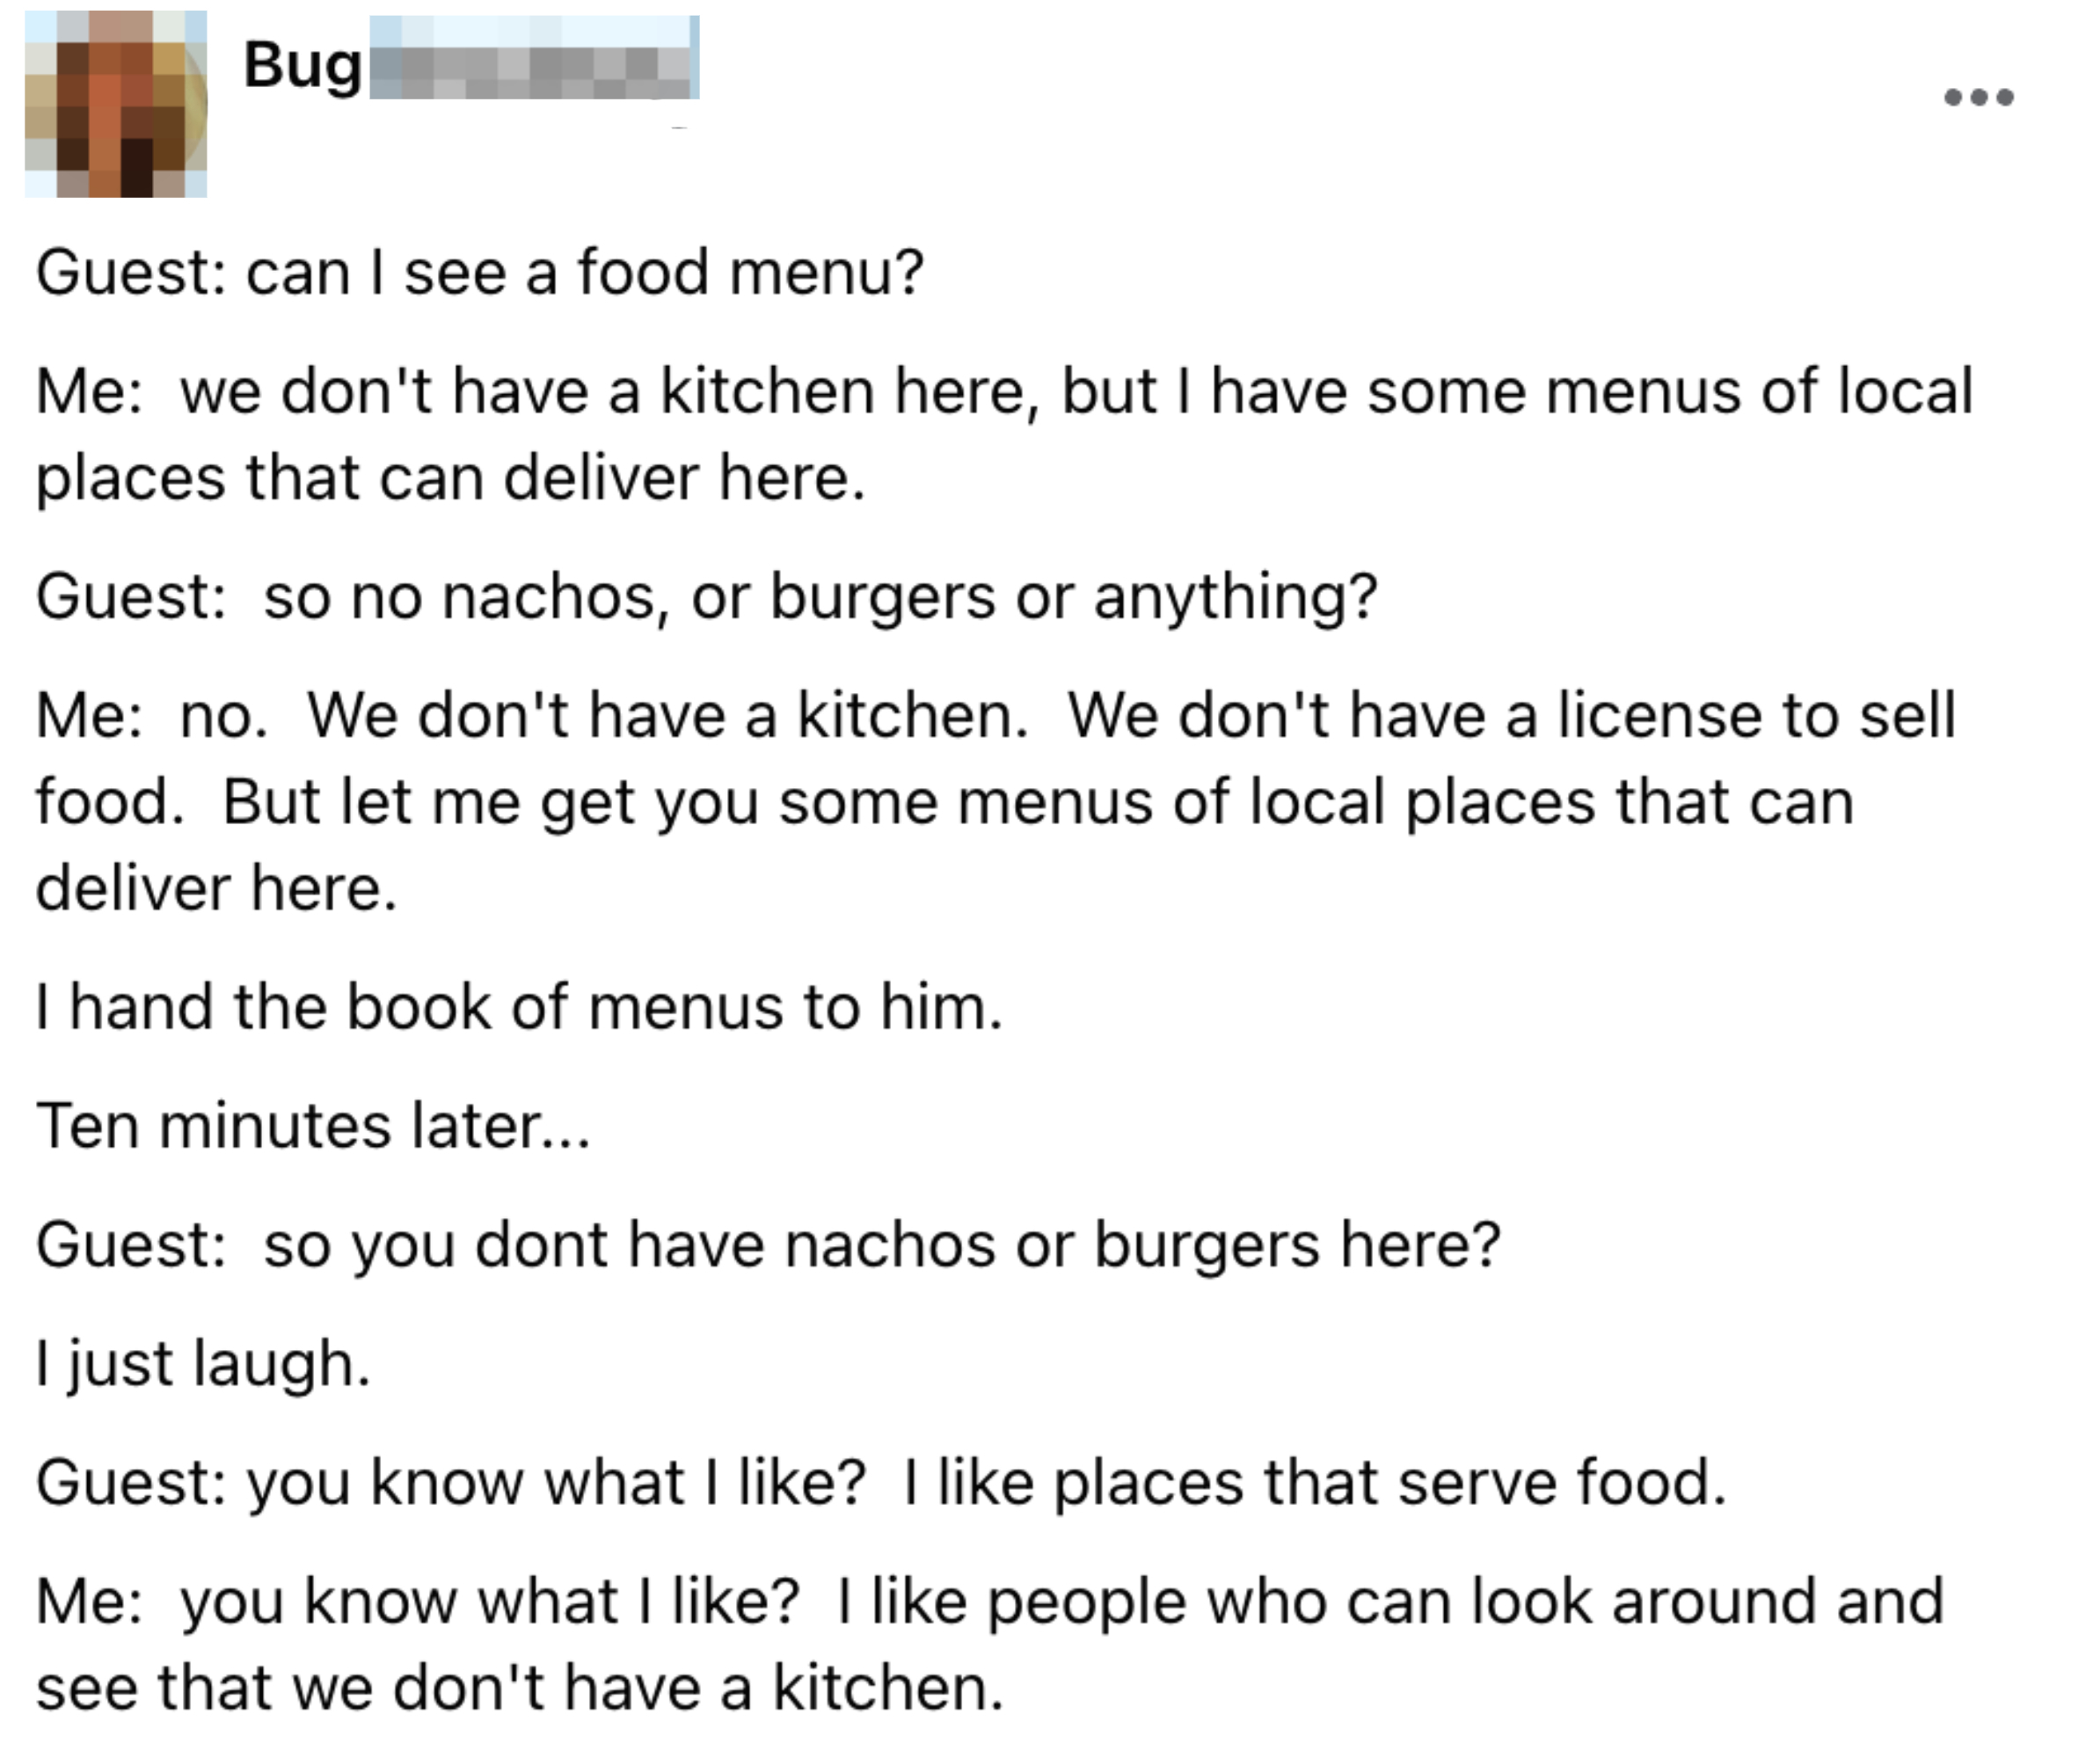 Facebook post sharing a humorous conversation about not having a kitchen but providing menus to local places